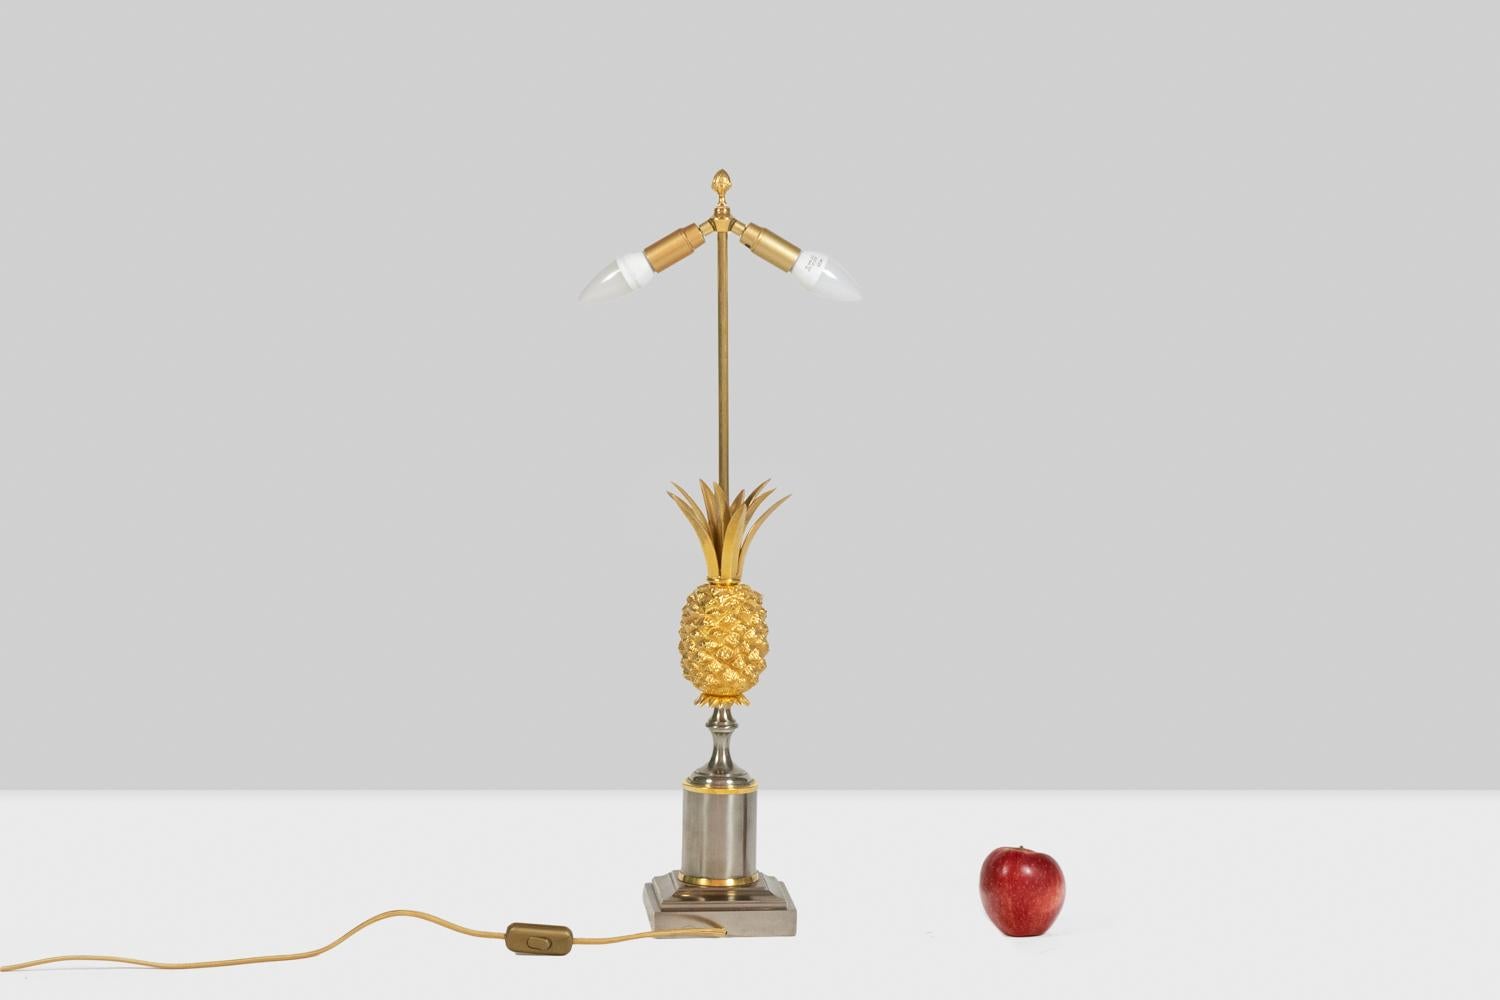 Gilt bronze lamp representing a stylized pineapple. Polished silver-colored base. Original lampshade in silver-colored sheet metal, ending at the top with a stylized tassel.

Dimensions: H 74 x W 14 x D 14 cm

French work realized in the 1970s.

New